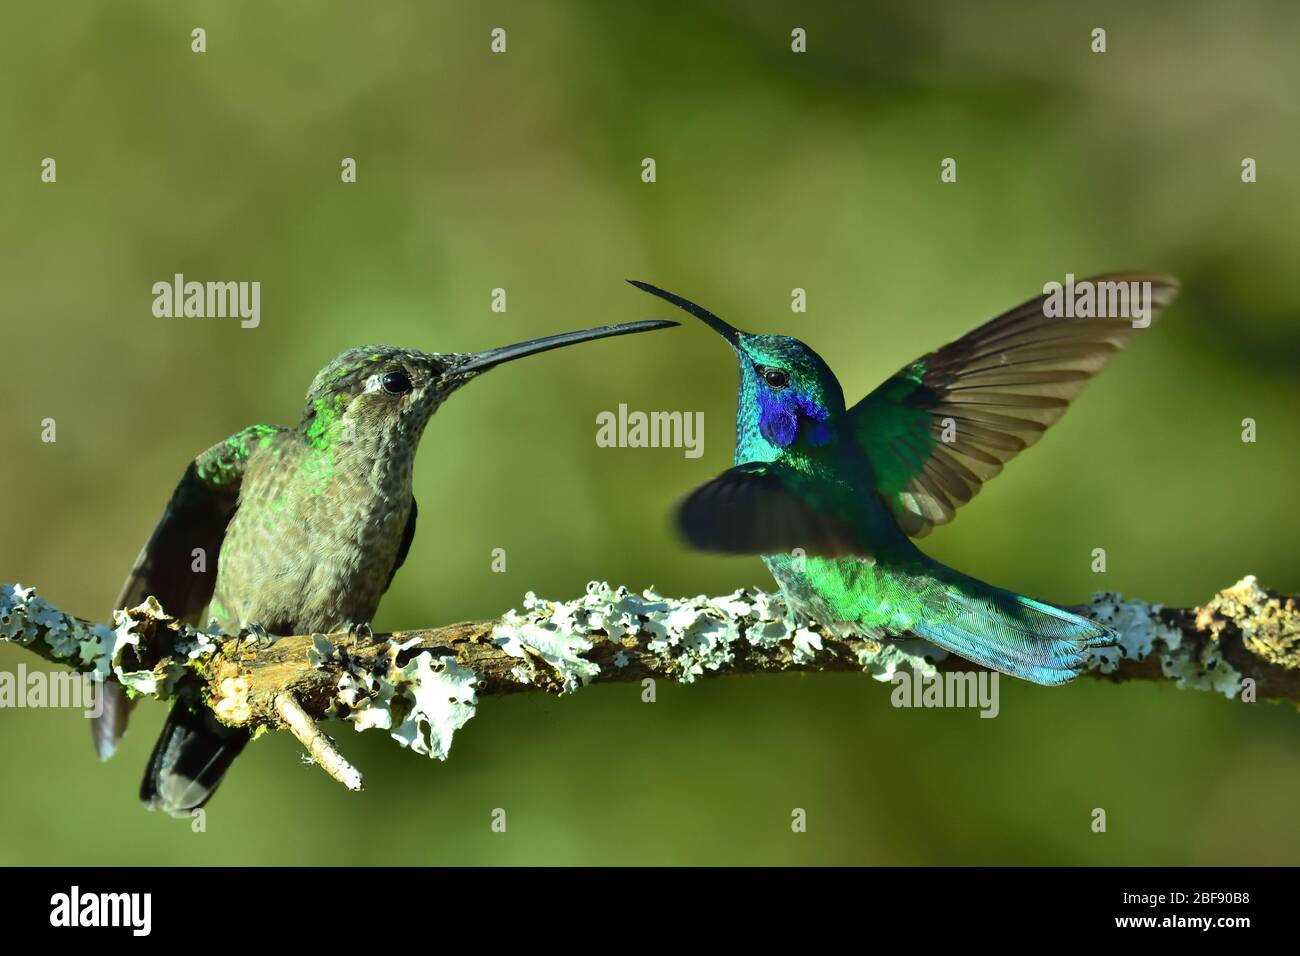 Talamanca and Lesser Violetear Hummingbirds duel on mossy branch Stock Photo